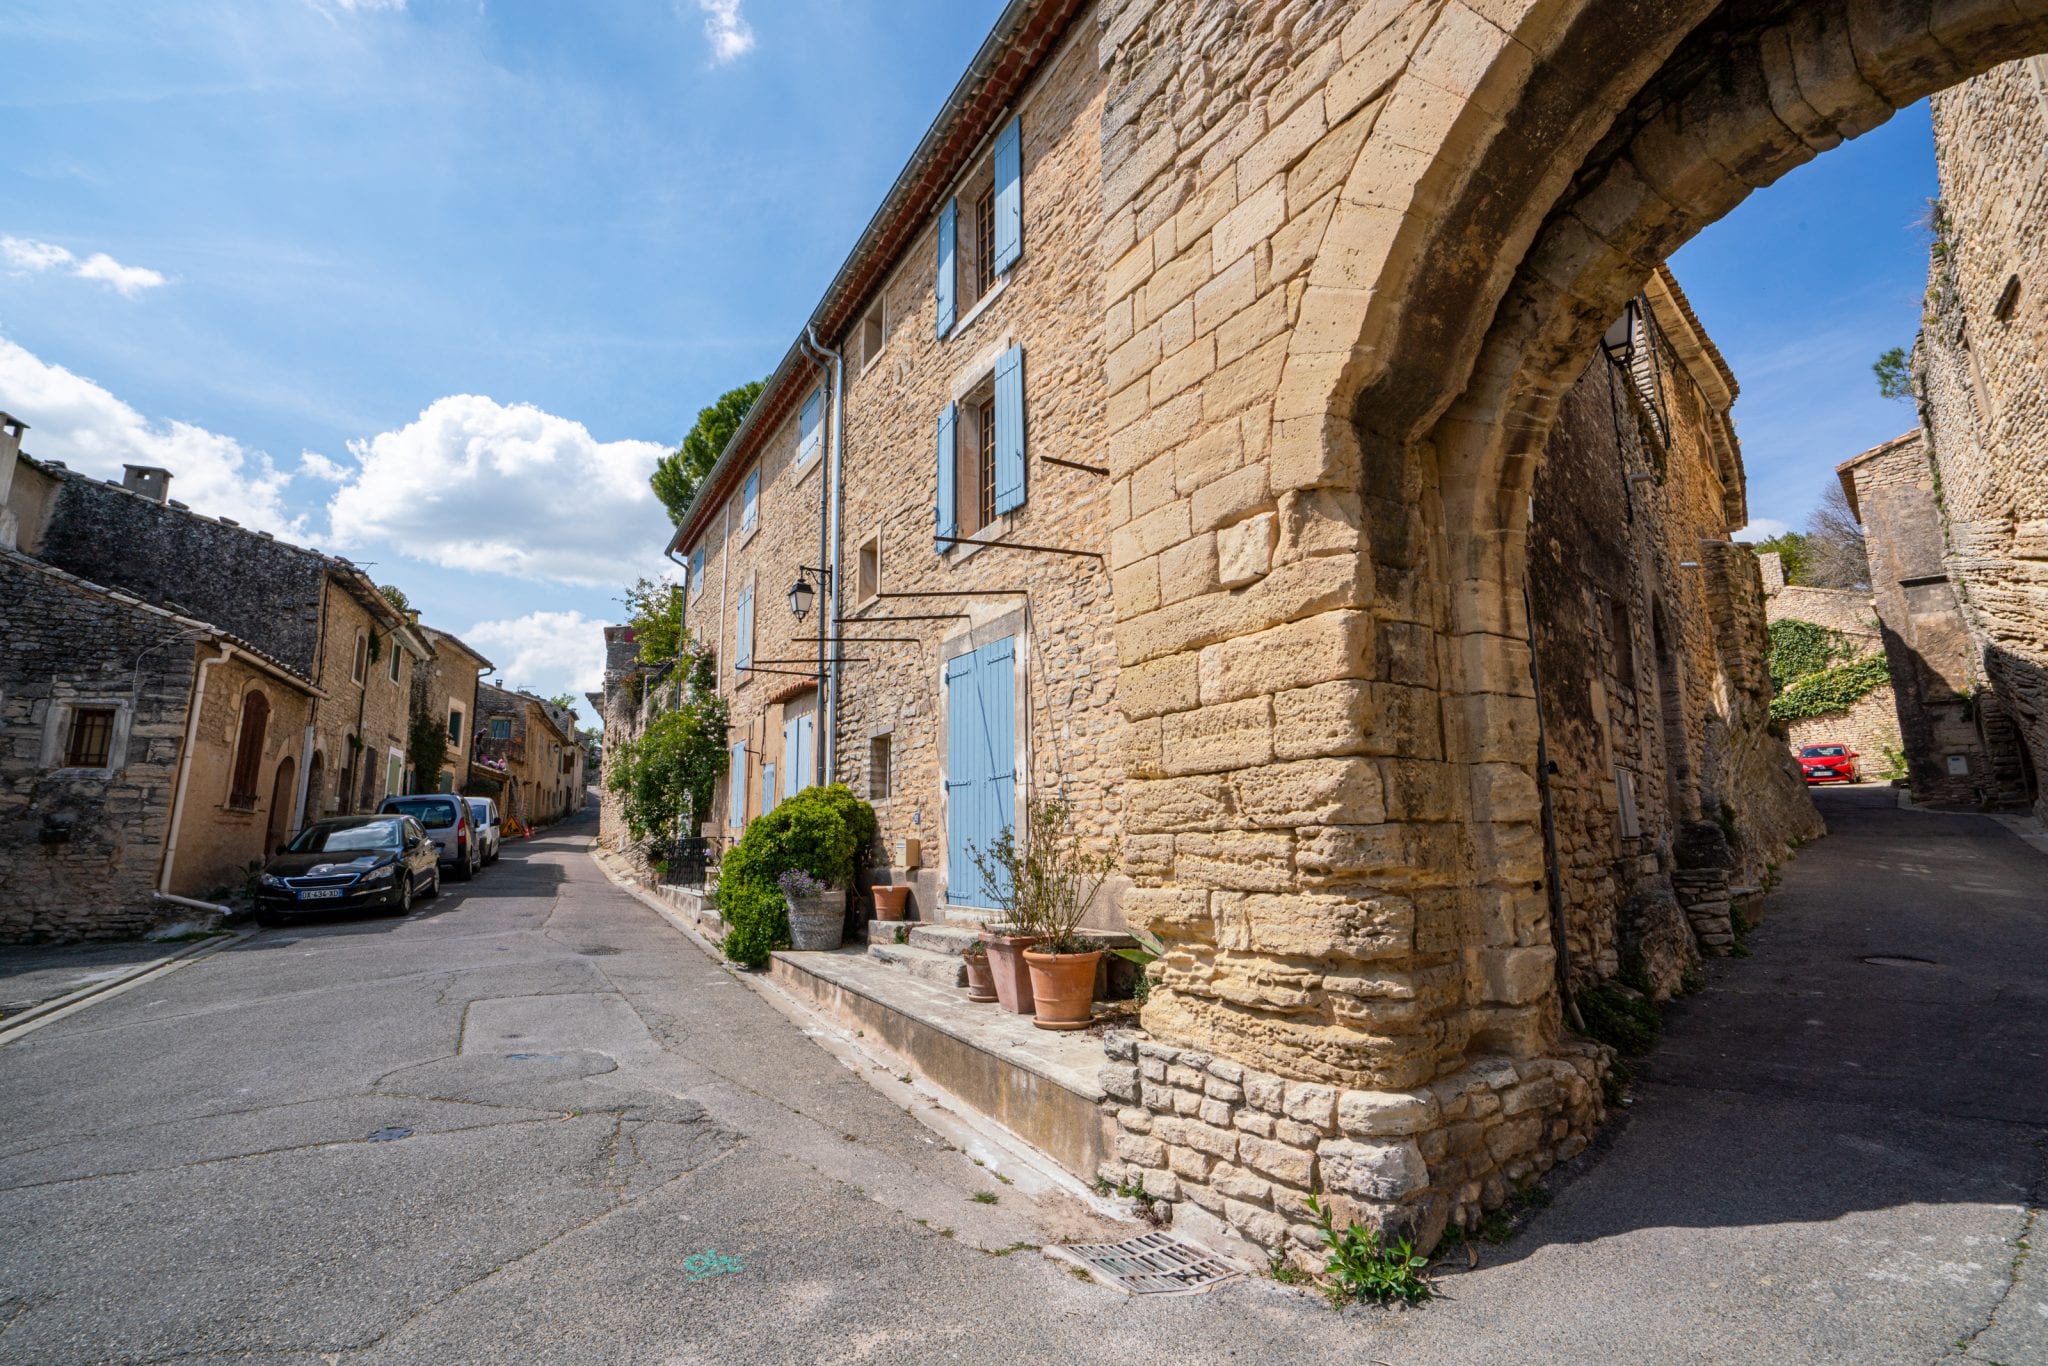 Street in Goult France with a stone building framed with blue shutters on the right